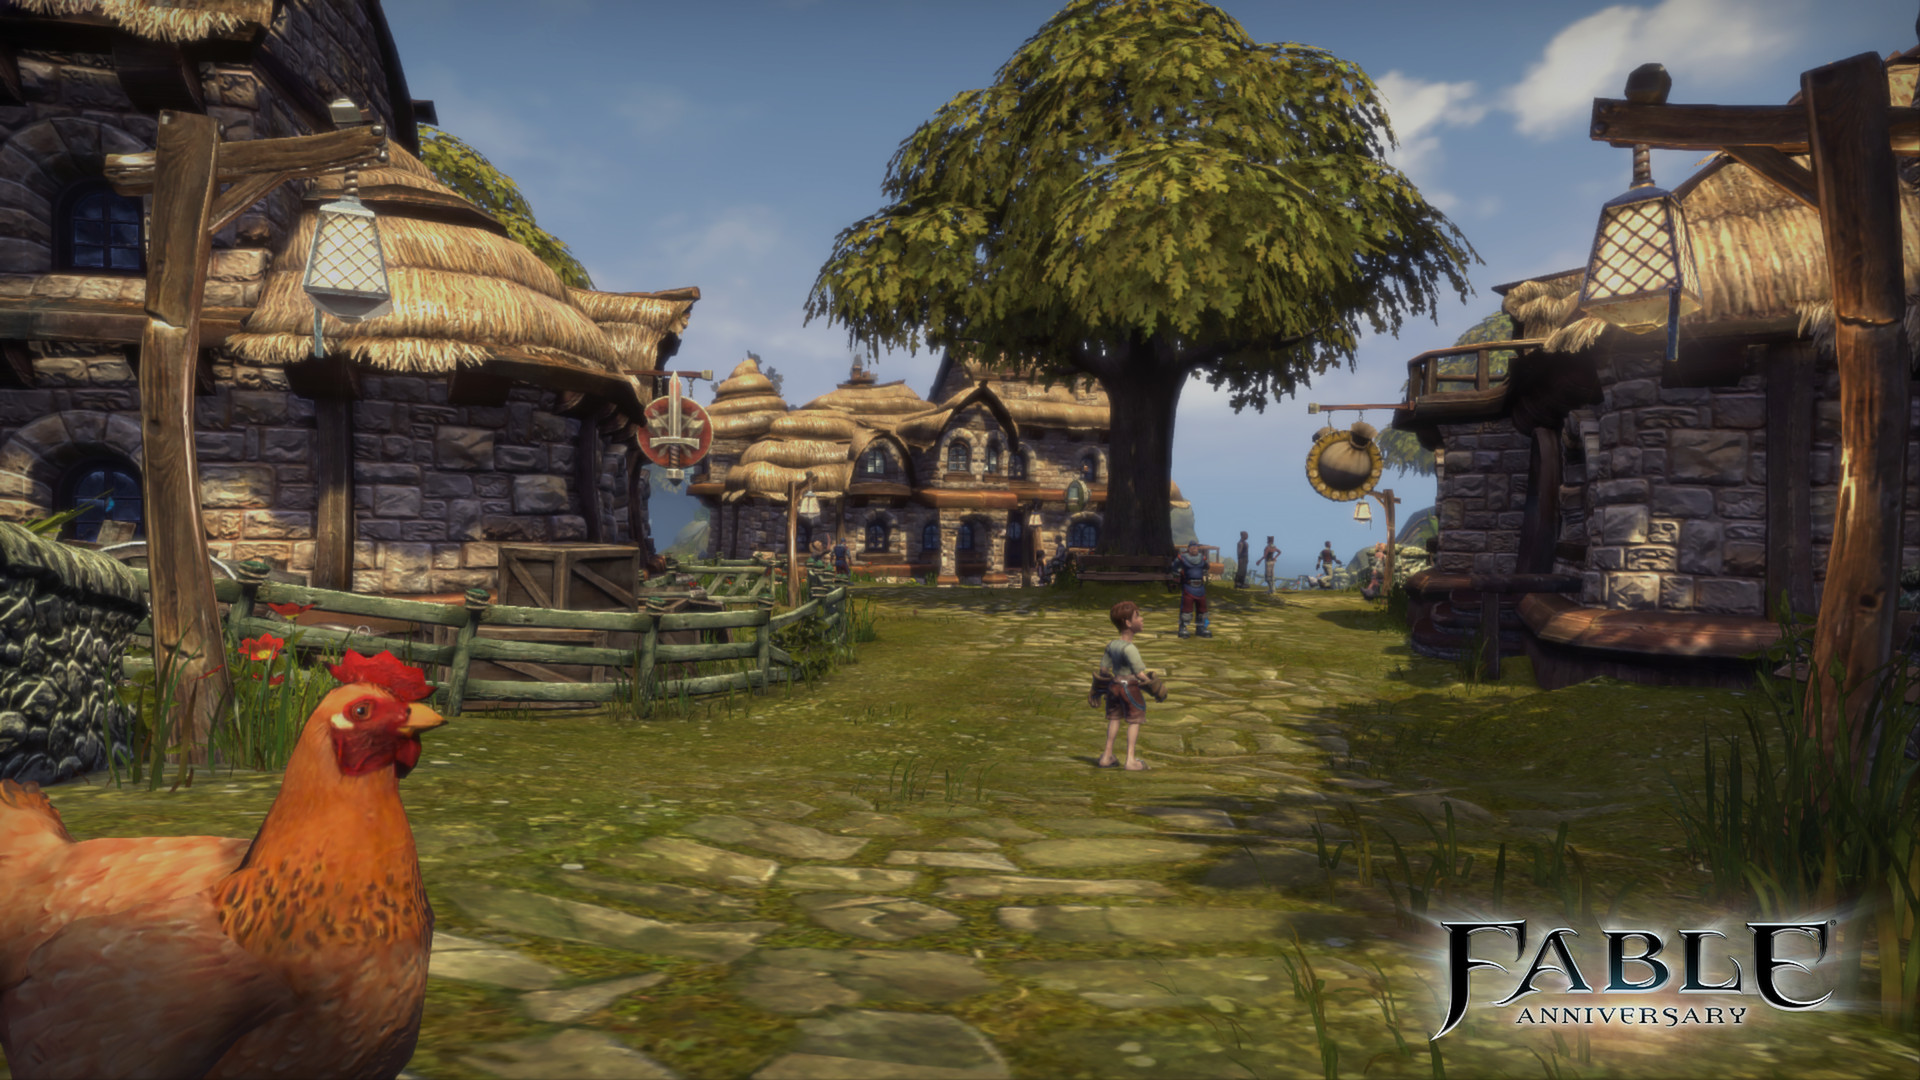 fable anniversary cheats and exploits pc steam